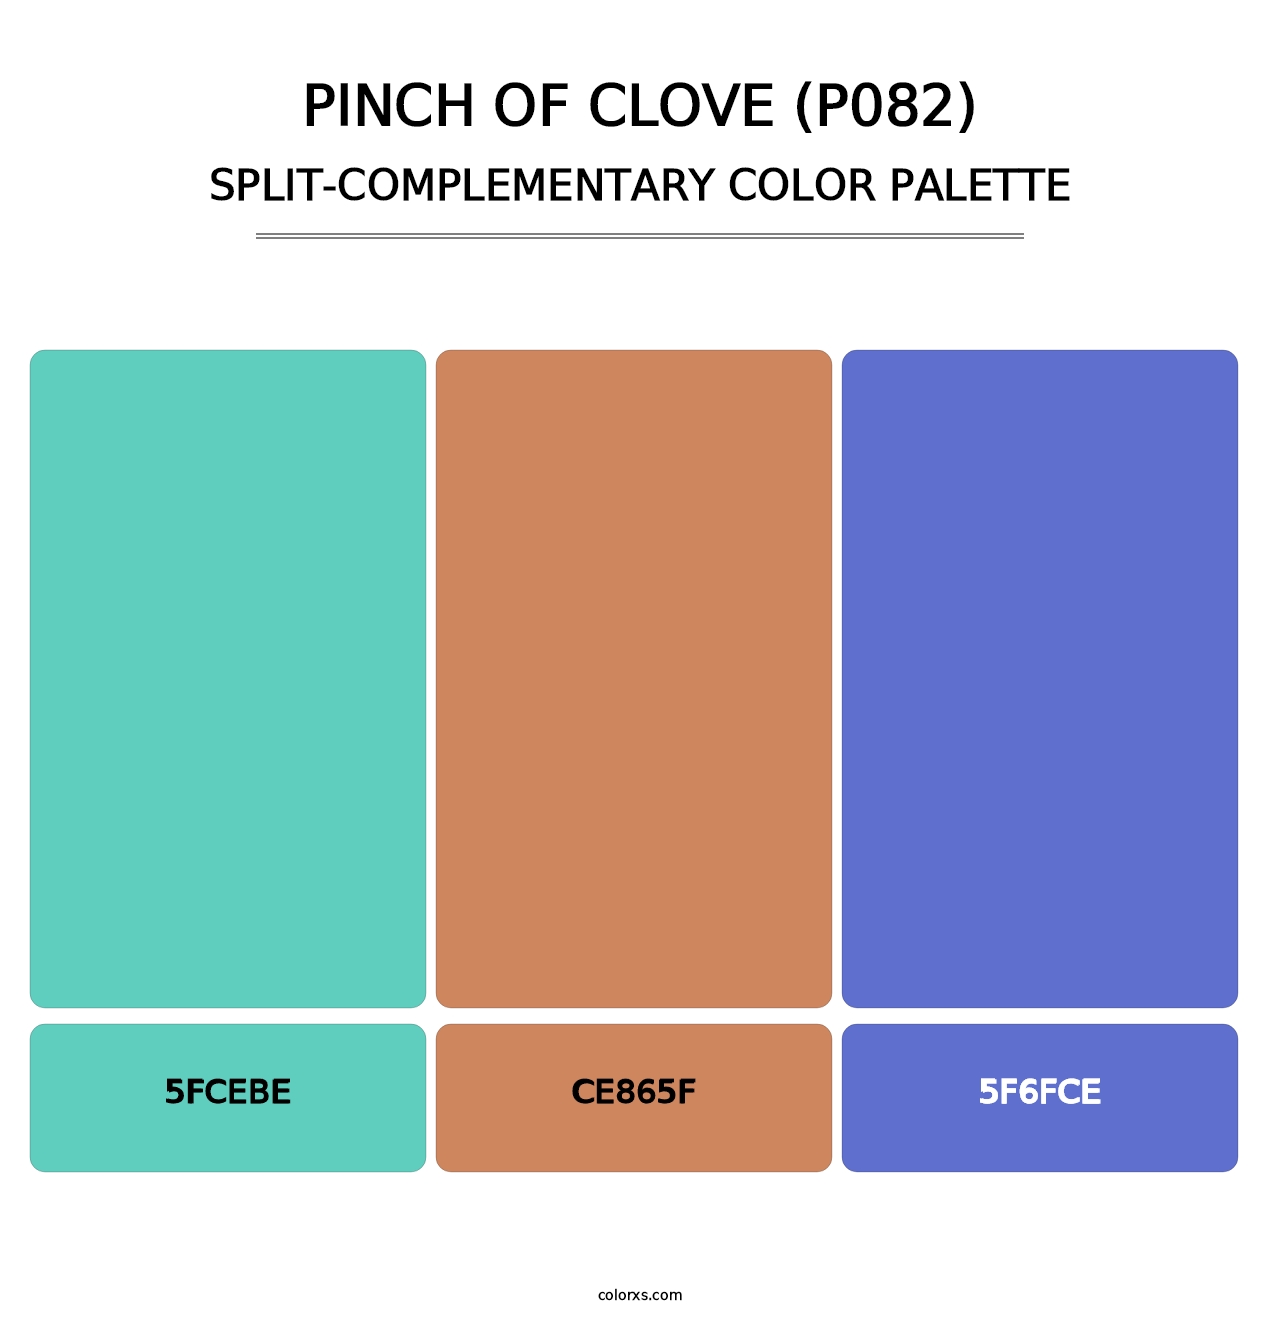 Pinch of Clove (P082) - Split-Complementary Color Palette